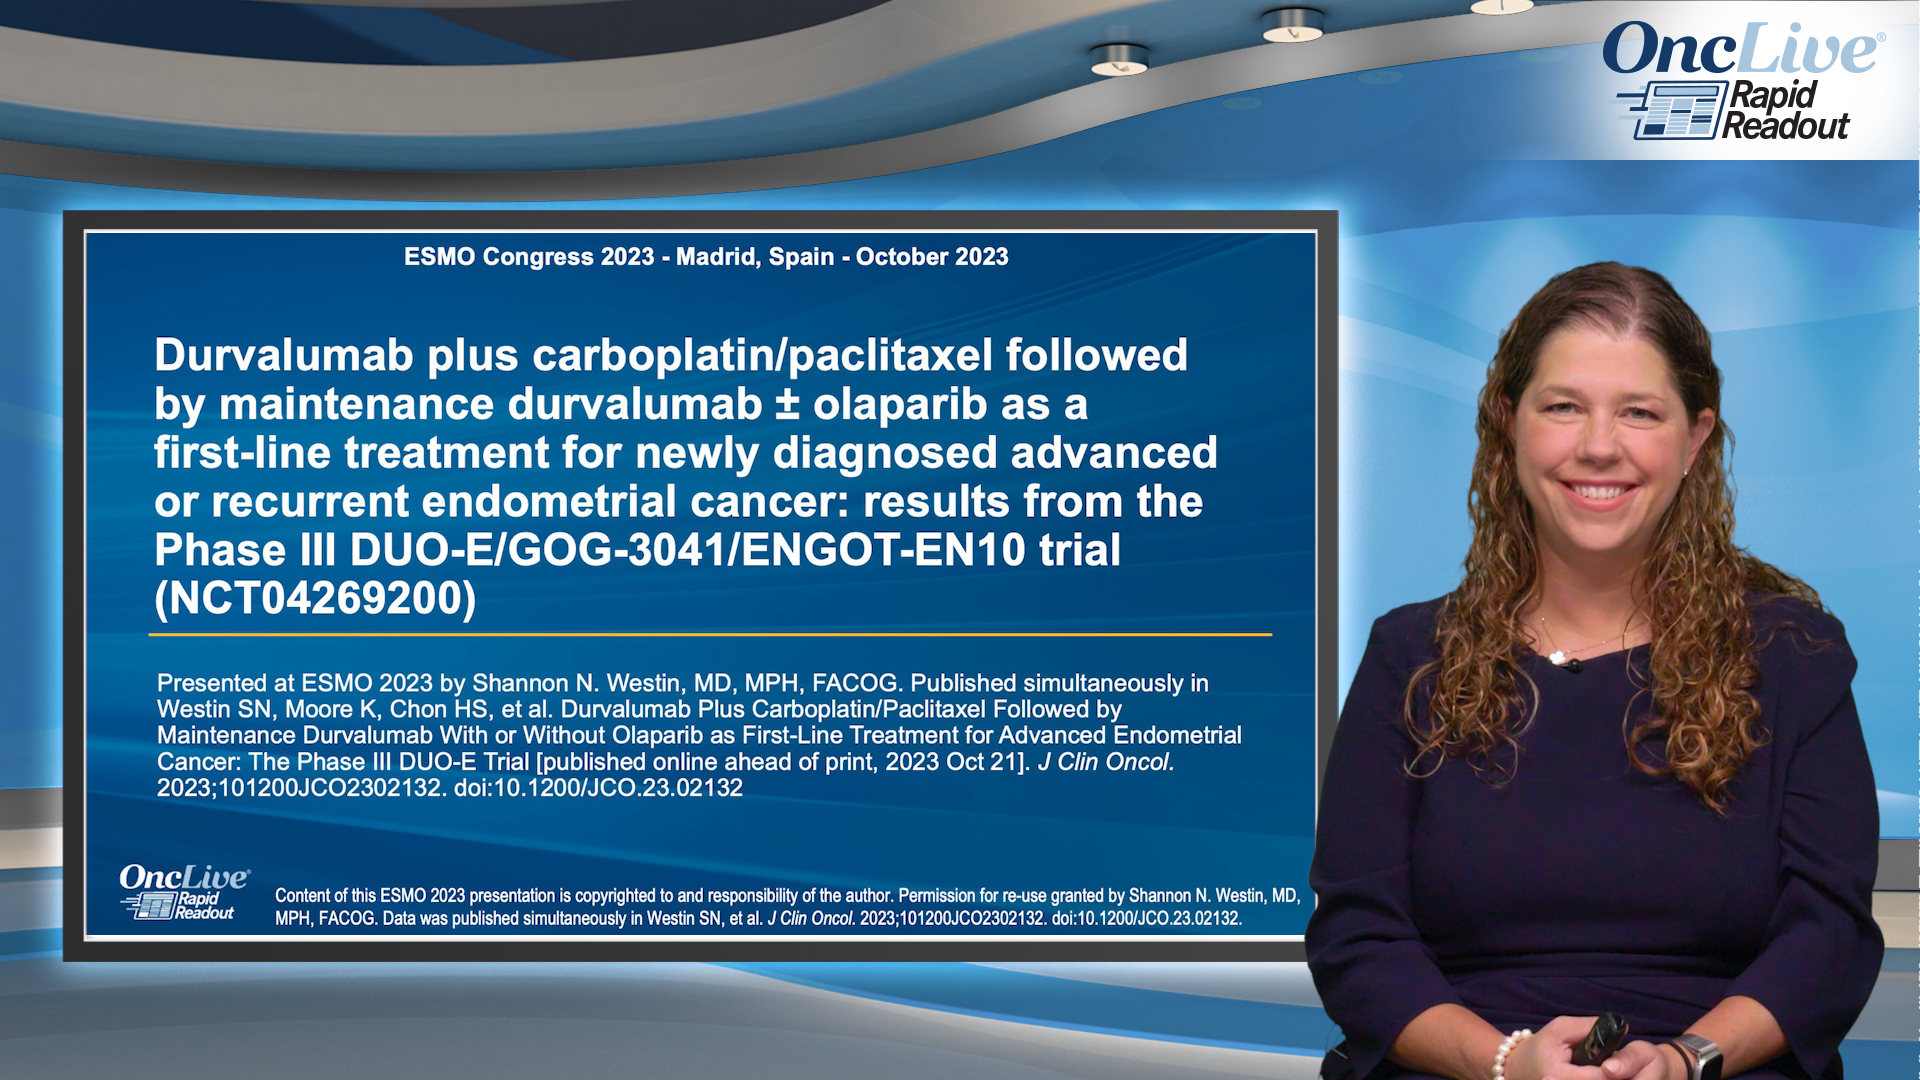 Durvalumab Plus Carboplatin/Paclitaxel Followed by Maintenance Durvalumab ± Olaparib as a First-Line Treatment for Newly Diagnosed Advanced or Recurrent Endometrial Cancer: Results From the Phase III DUO-E/GOG-3041/ENGOT-EN10 Trial